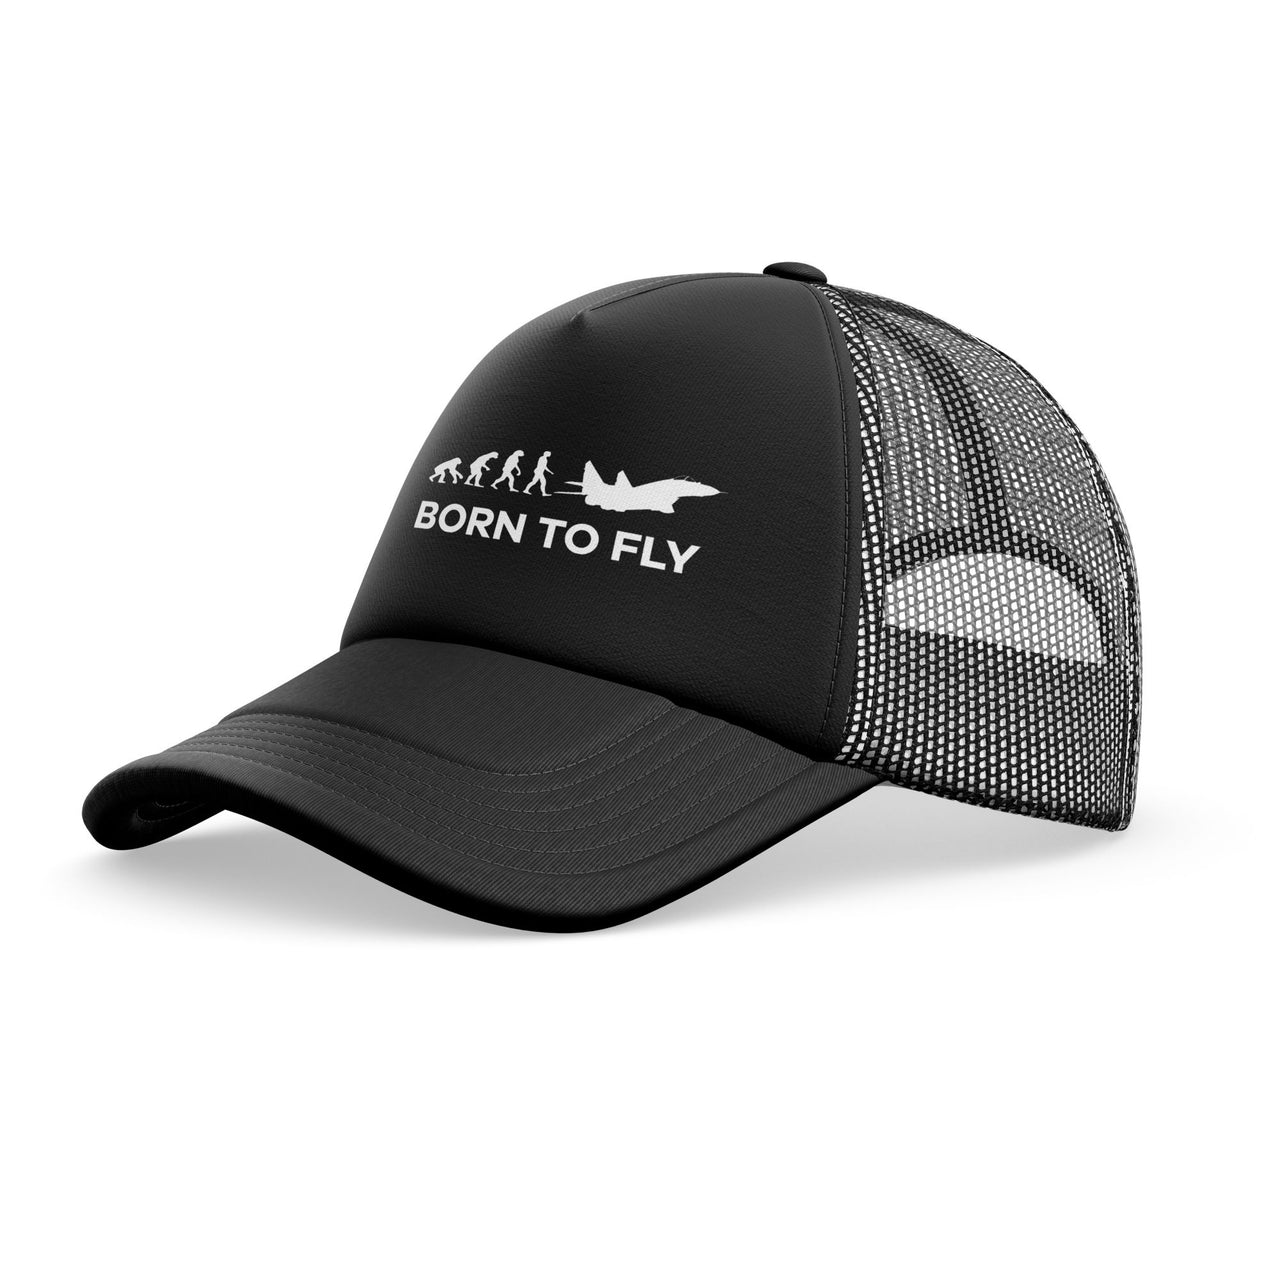 Born To Fly Military Designed Trucker Caps & Hats